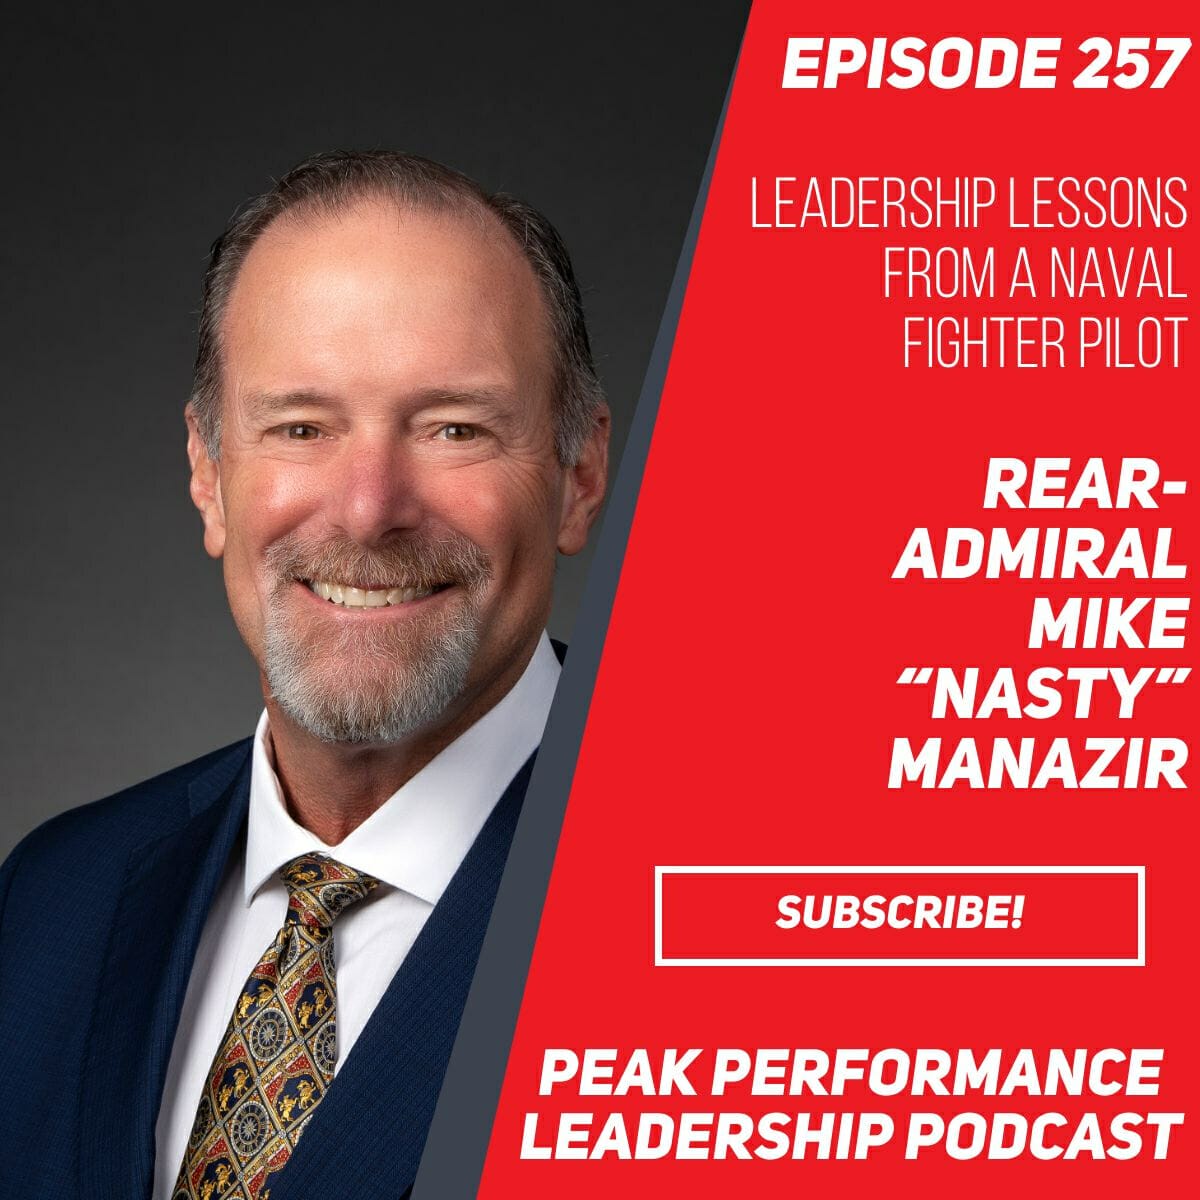 Leadership Lessons From A Naval Fighter Pilot | Rear-Admiral Mike “Nasty” Manazir  | Episode 257